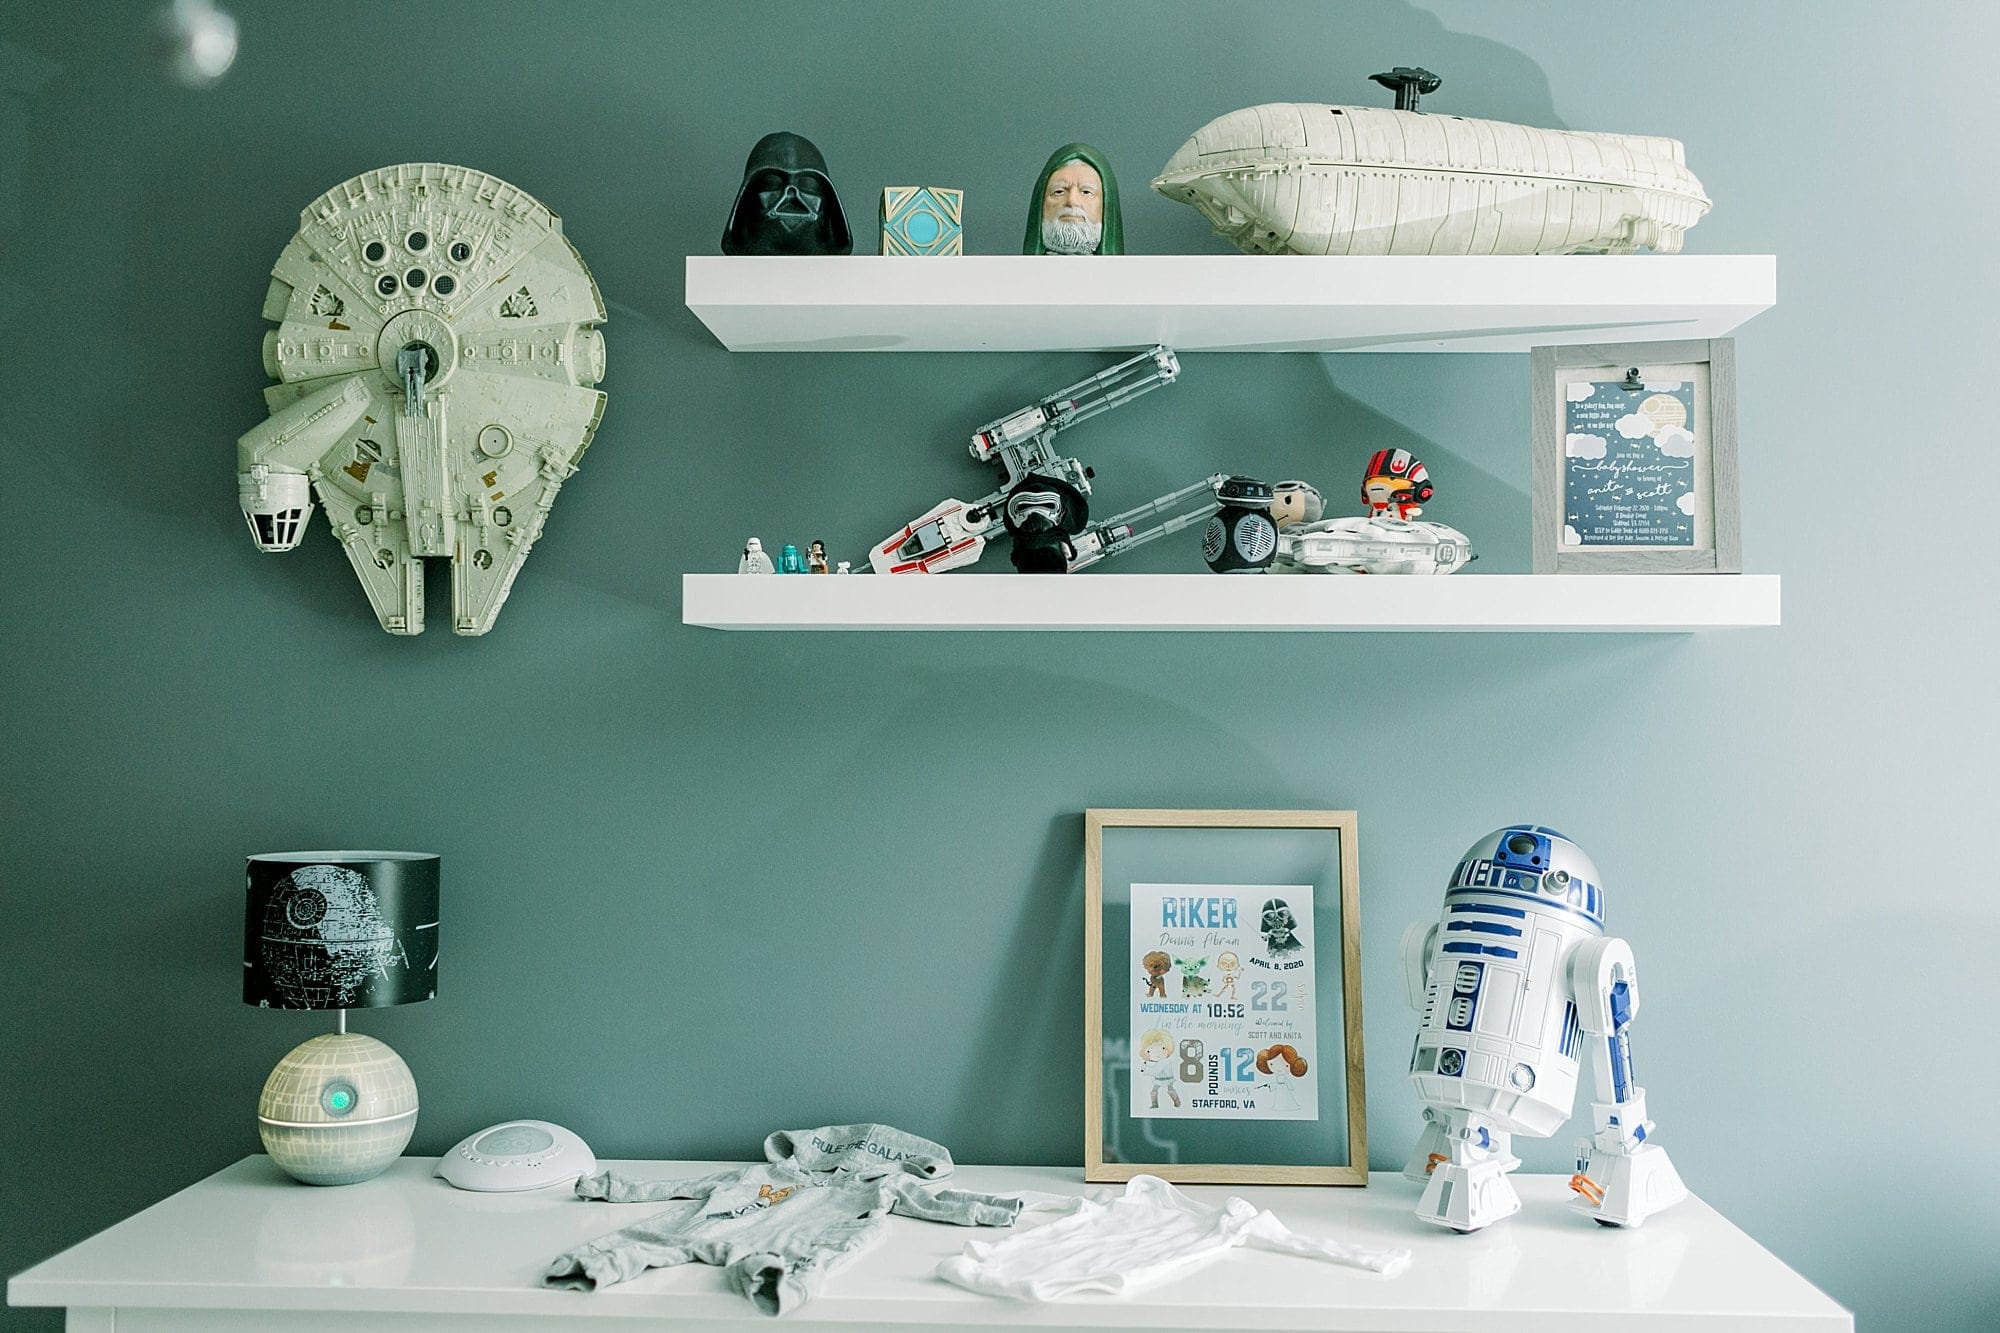 star wars nursery decor - hanging millennium falcon next to floating shelves filled with star wars figures